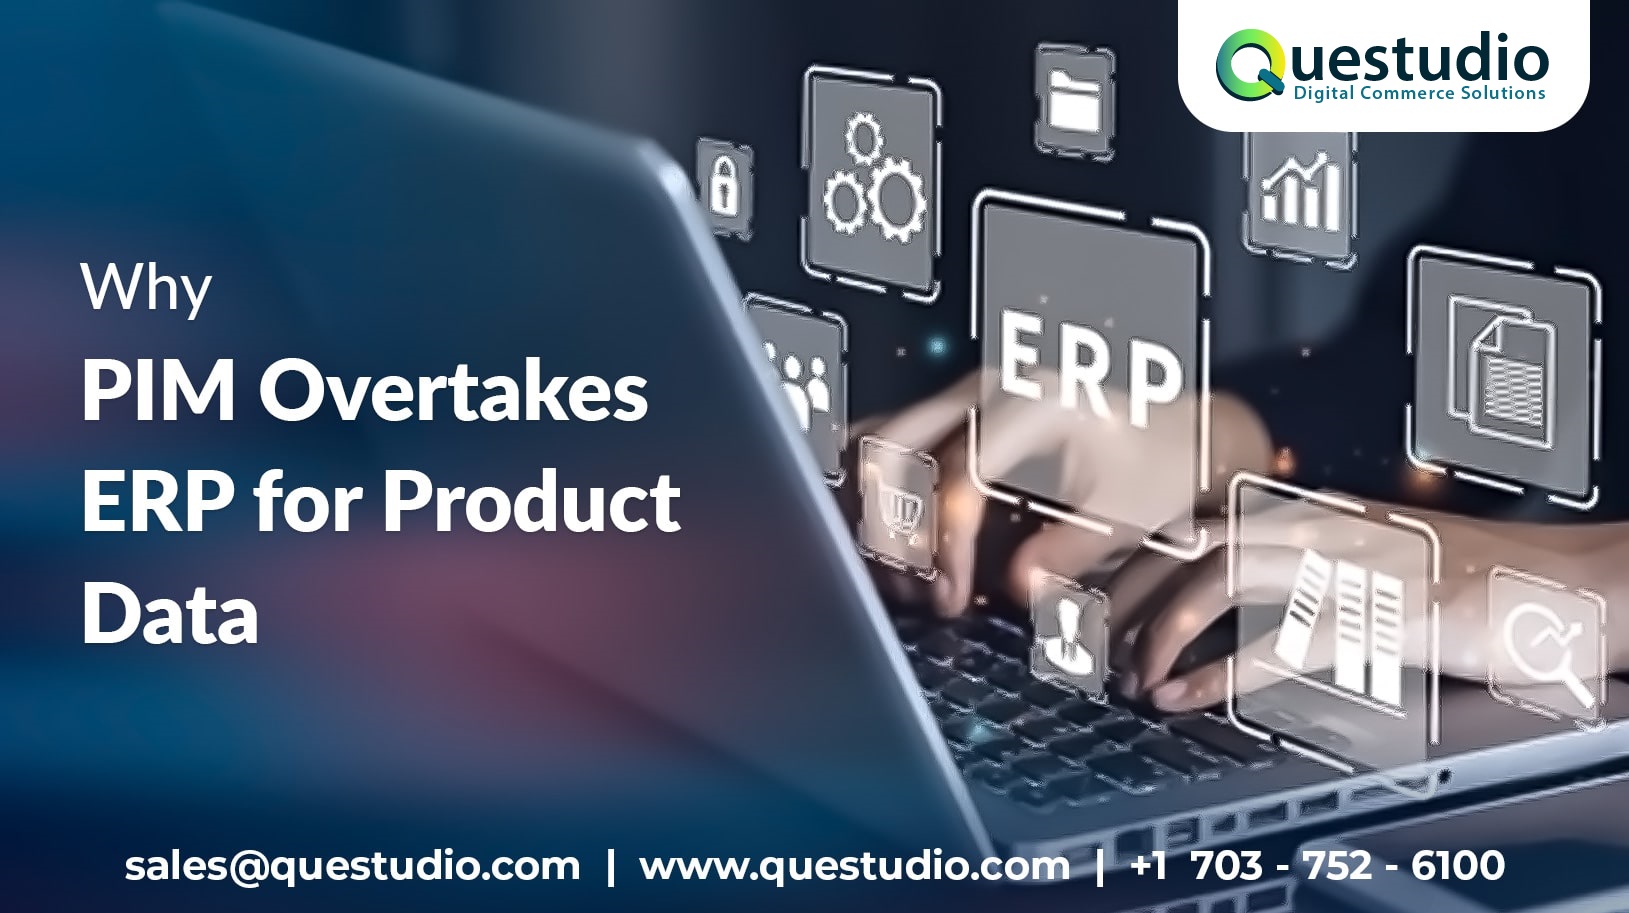 Why-PIM-Overtakes-ERP-for-Product-Data-questudio